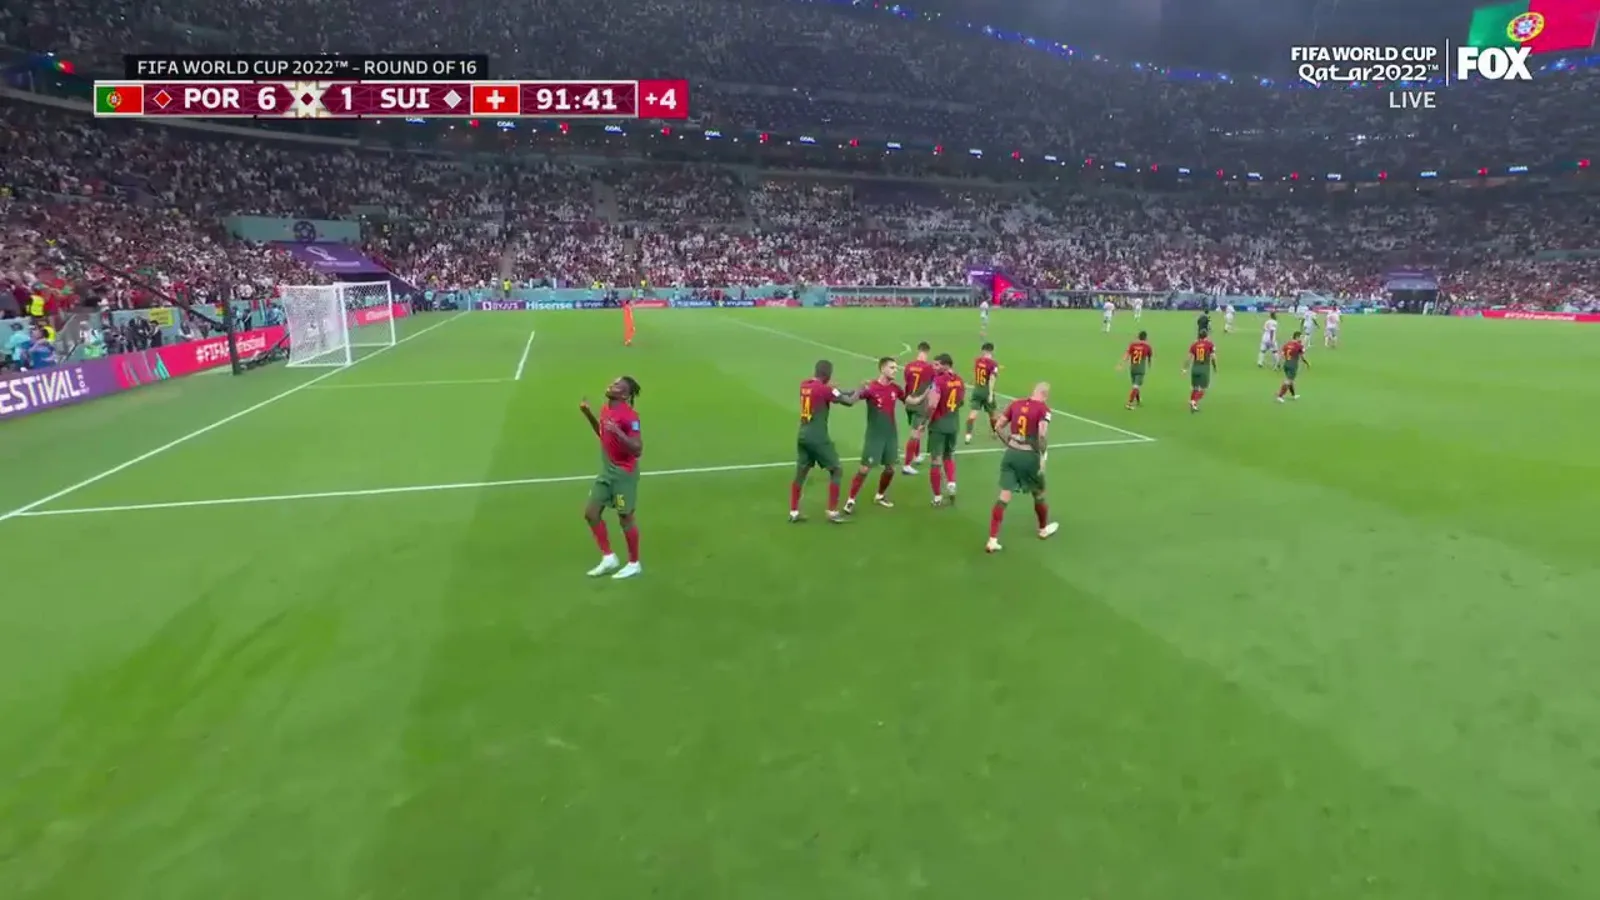 Rafael Leao of Portugal scores a goal against Switzerland in 90+2'